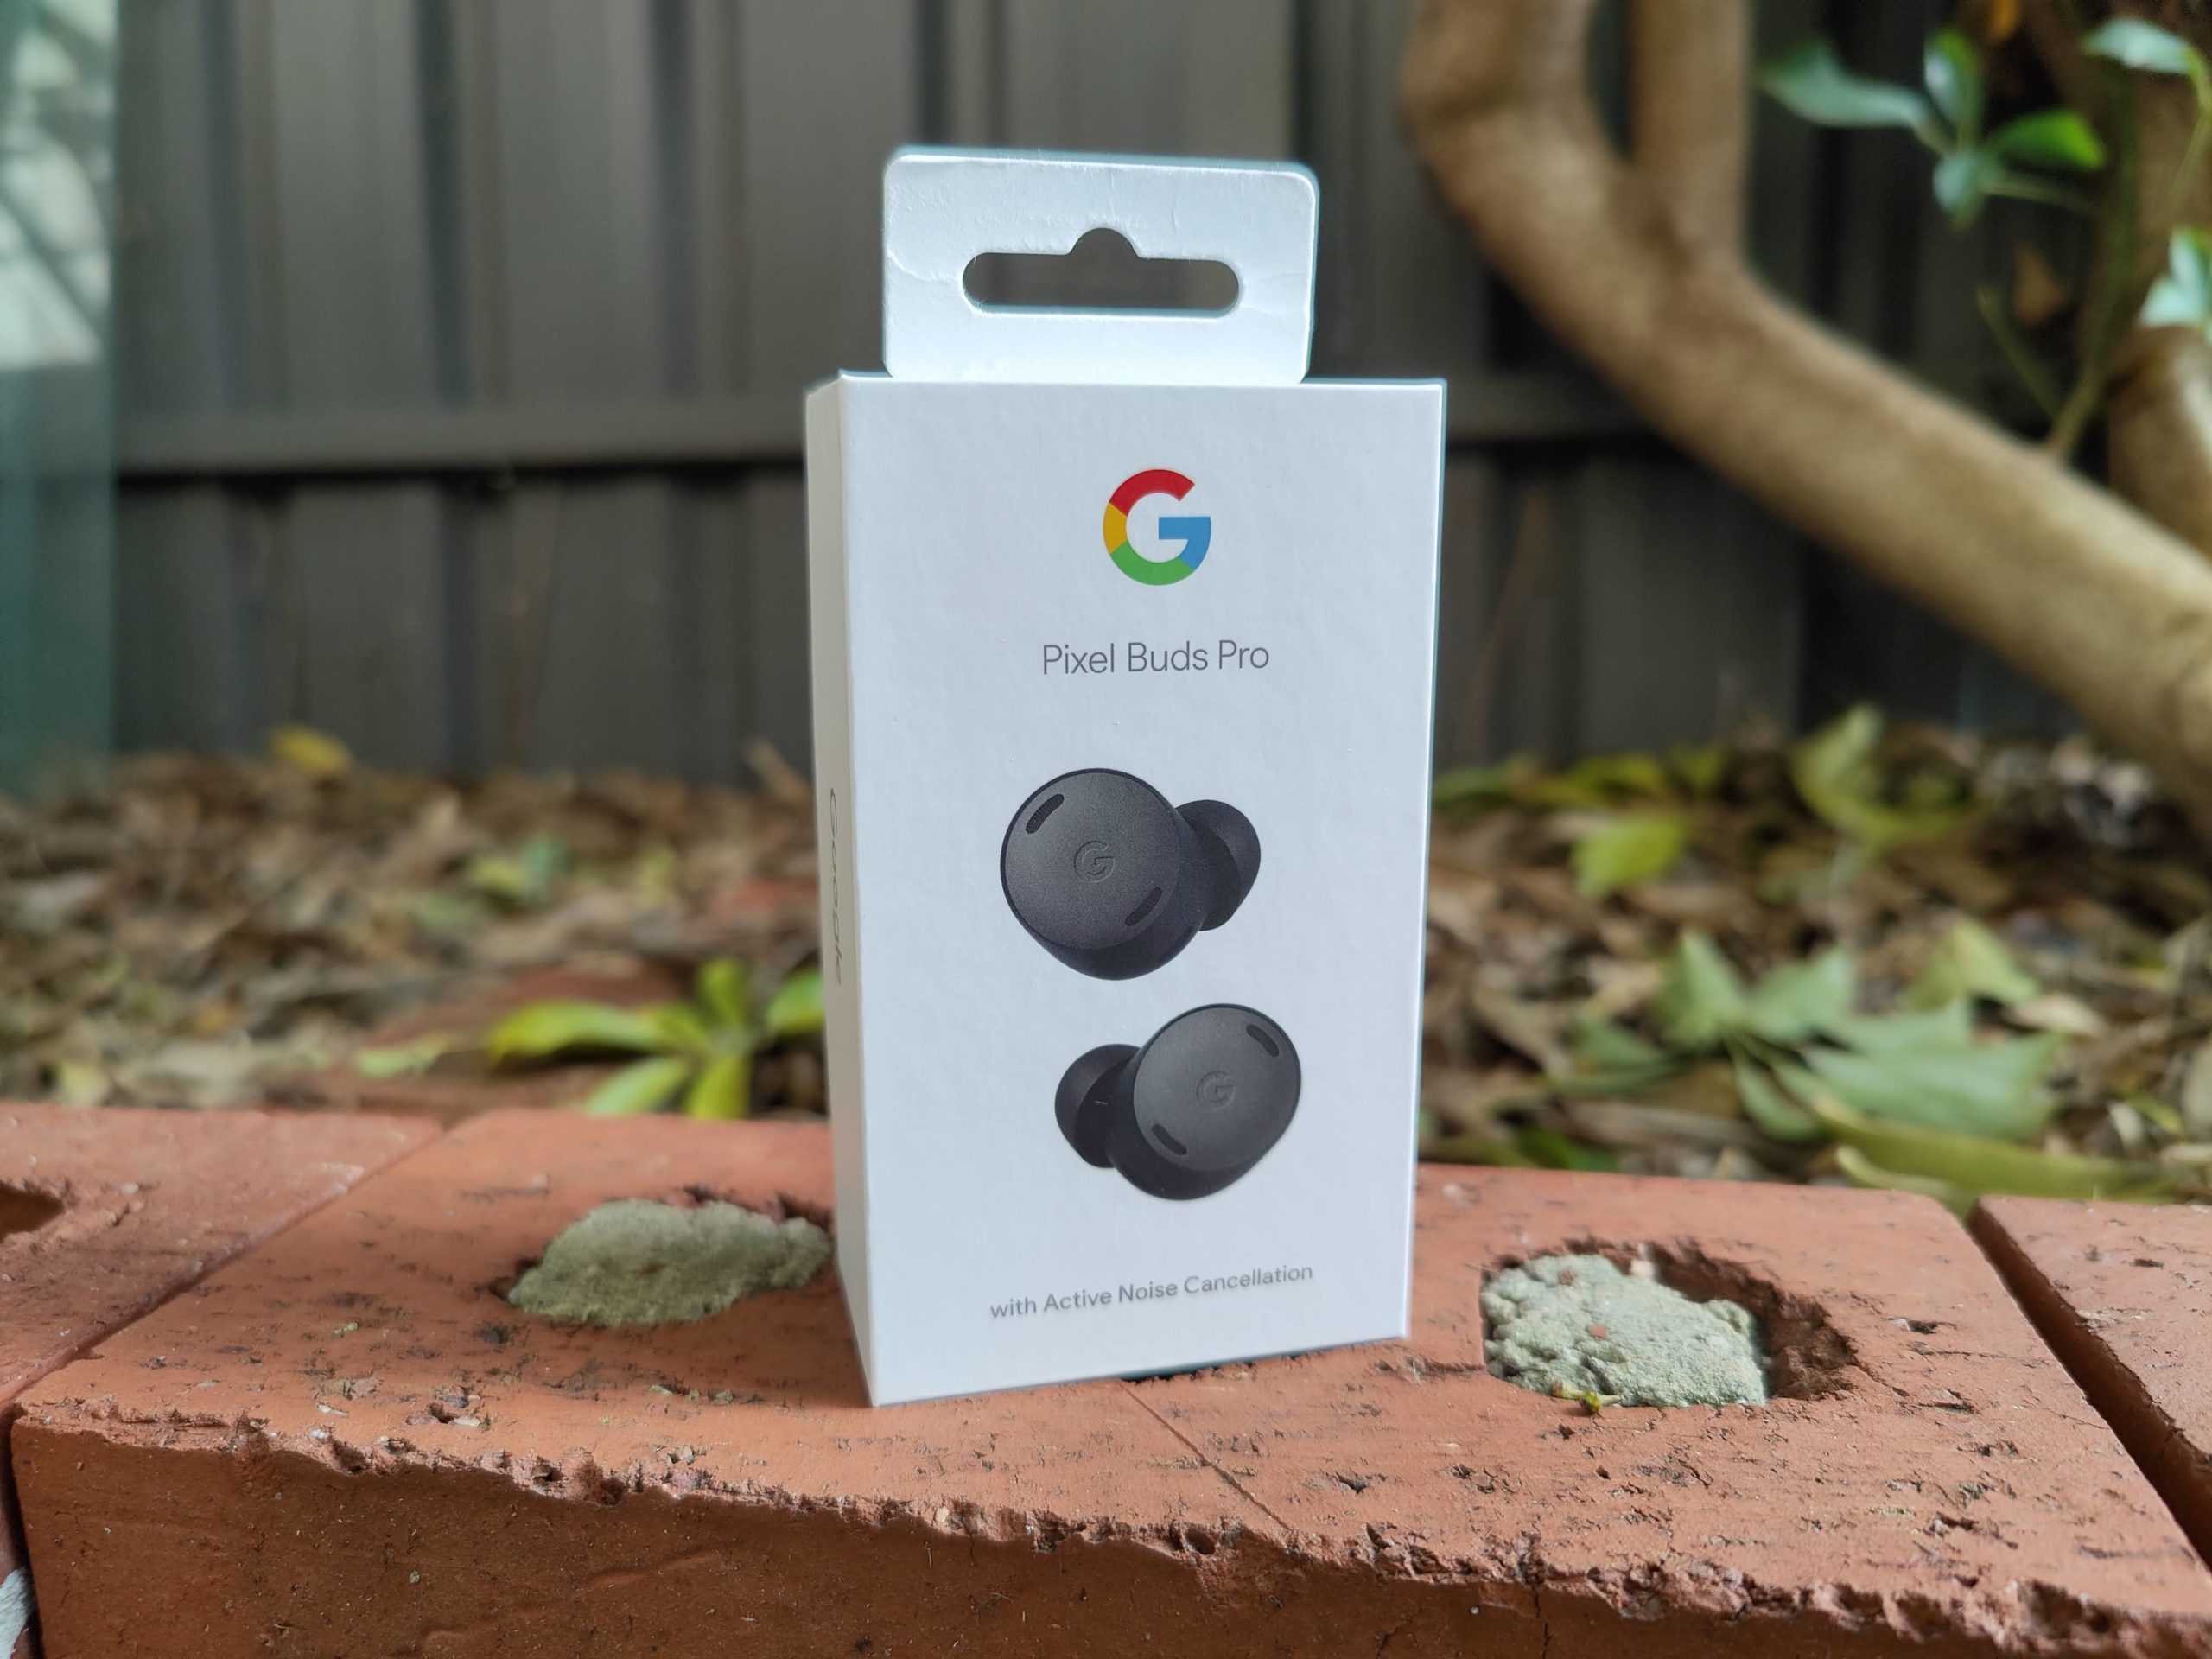 Hands-on Review: Google Pixel Buds Pro